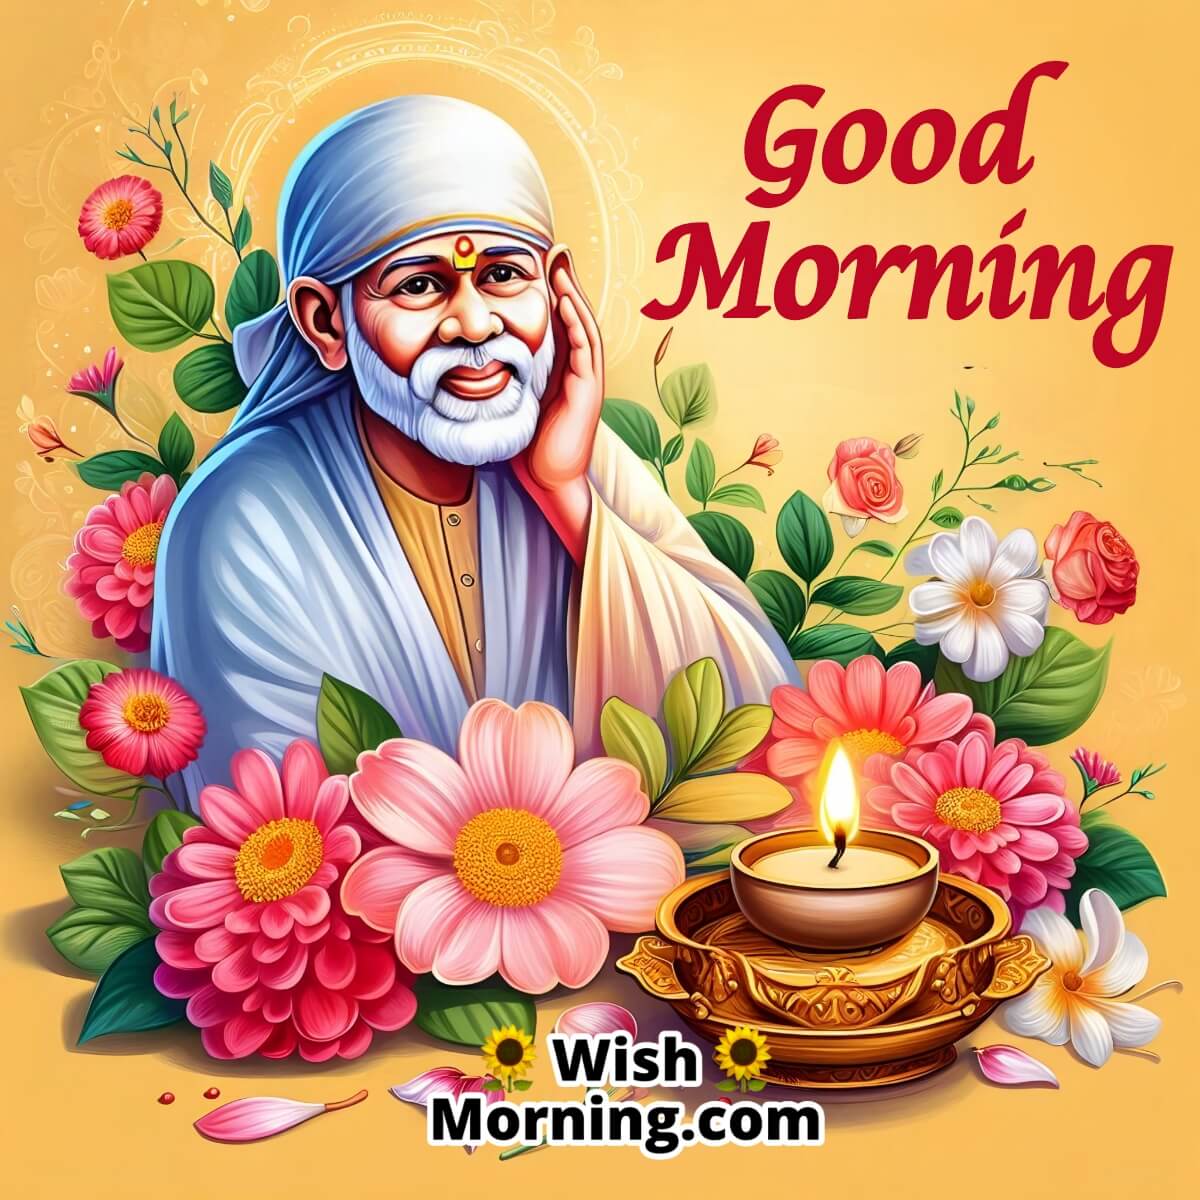 Good Morning Saibaba With Flowers